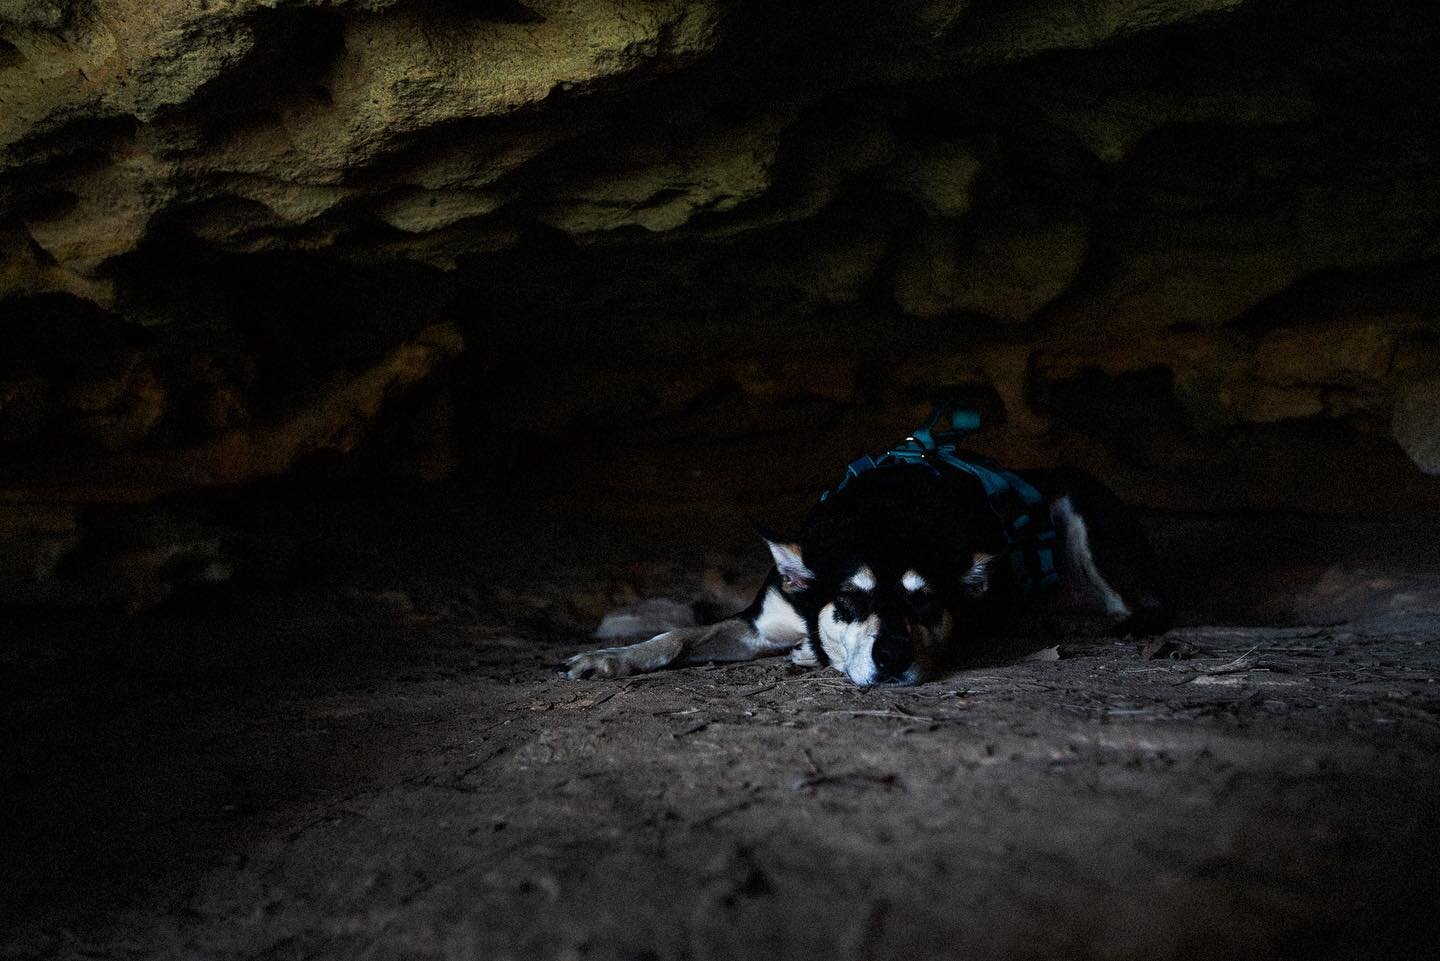 A real live dingo found in a cave&hellip; 
.
.
.
.
.
#kelpies
#dogs
#dogsofinstagram